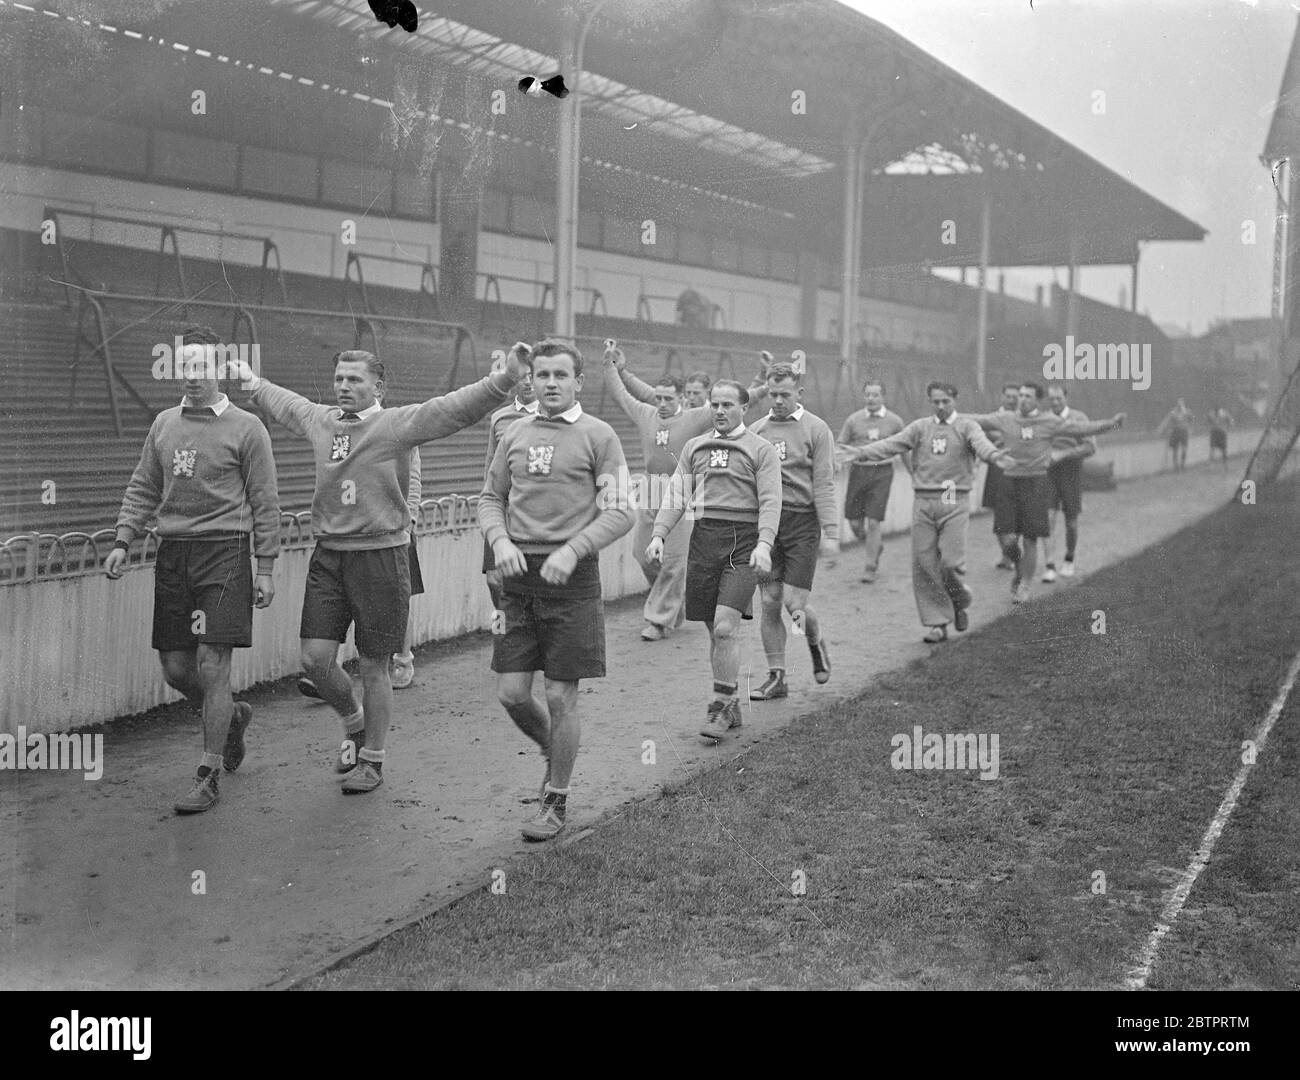 Czech footballers practice at Tottenham. The Czechoslovakian football team which is to meet England in the first international match between the two countries played in Britain, tomorrow (Wednesday), practised at Tottenham Hotspur's ground in White Hart Lane, where the match is to take place. Photo shows, Czech players exercising at Tottenham. 30 November 1937 Stock Photo